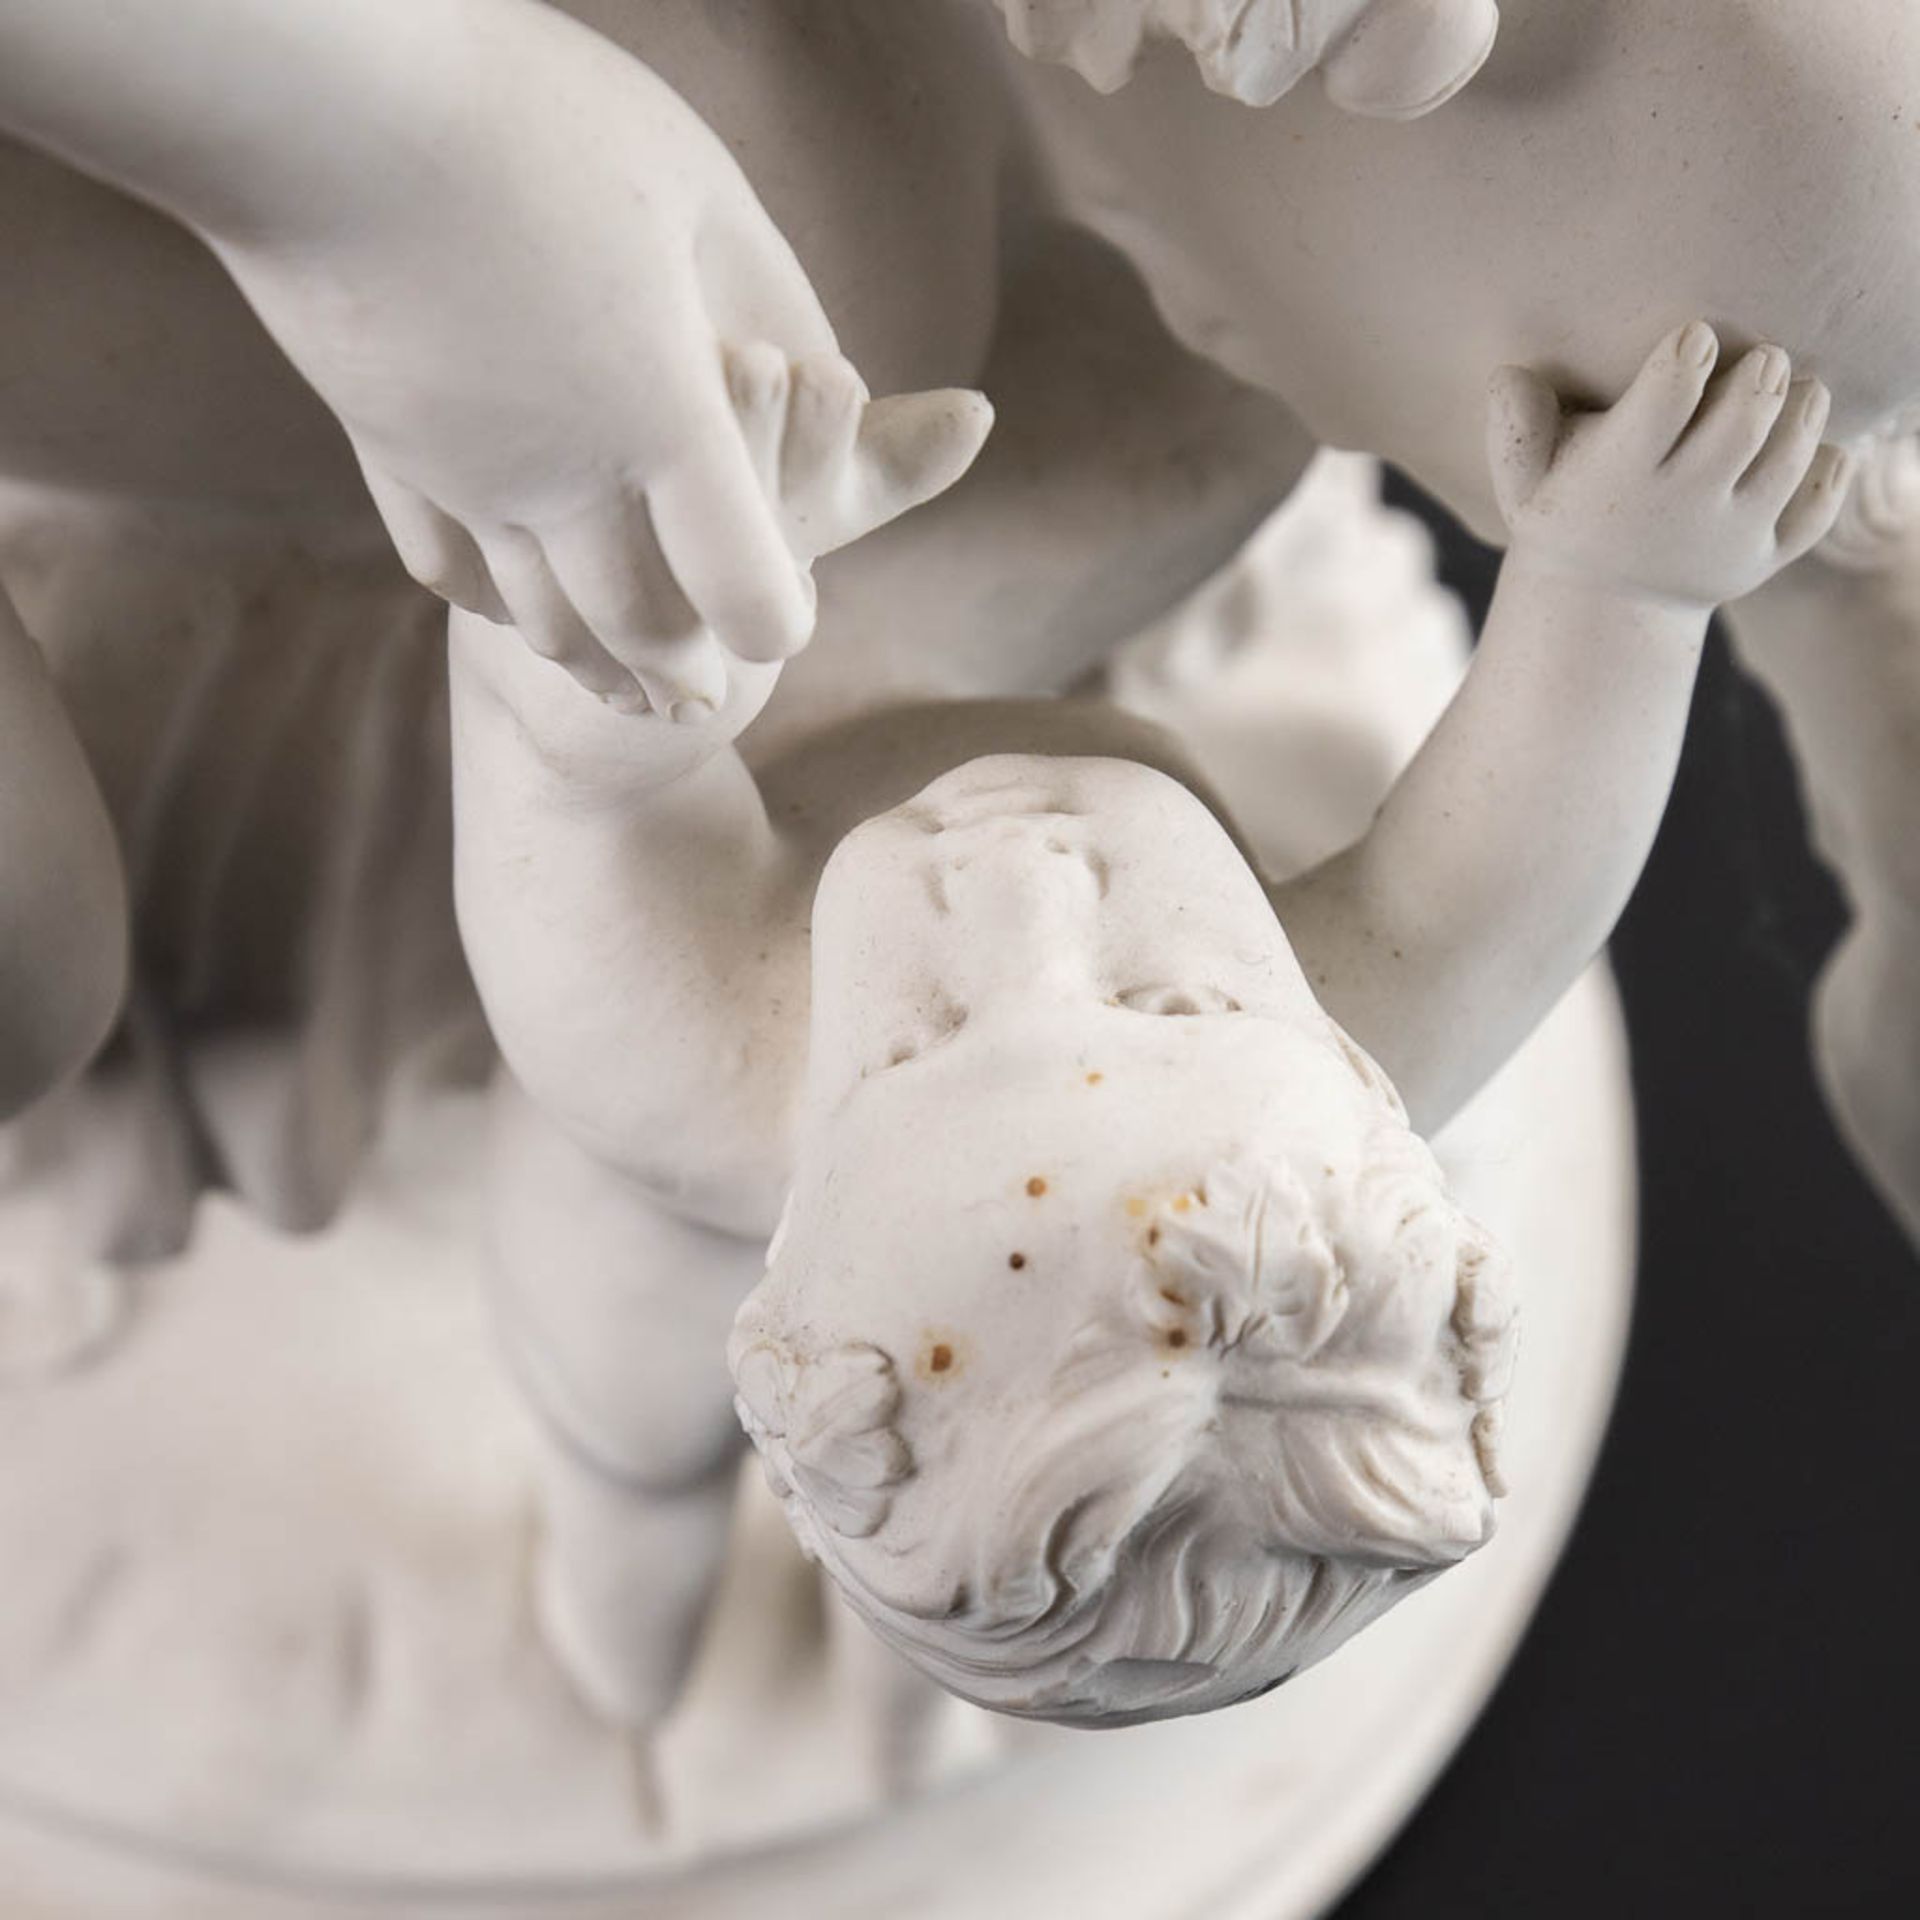 CLODION (1738-1814)(after) 'Satyr, Nymph and putto' bisque porcelain, marked Sèvres. (H:43 x D:25 cm - Image 10 of 14